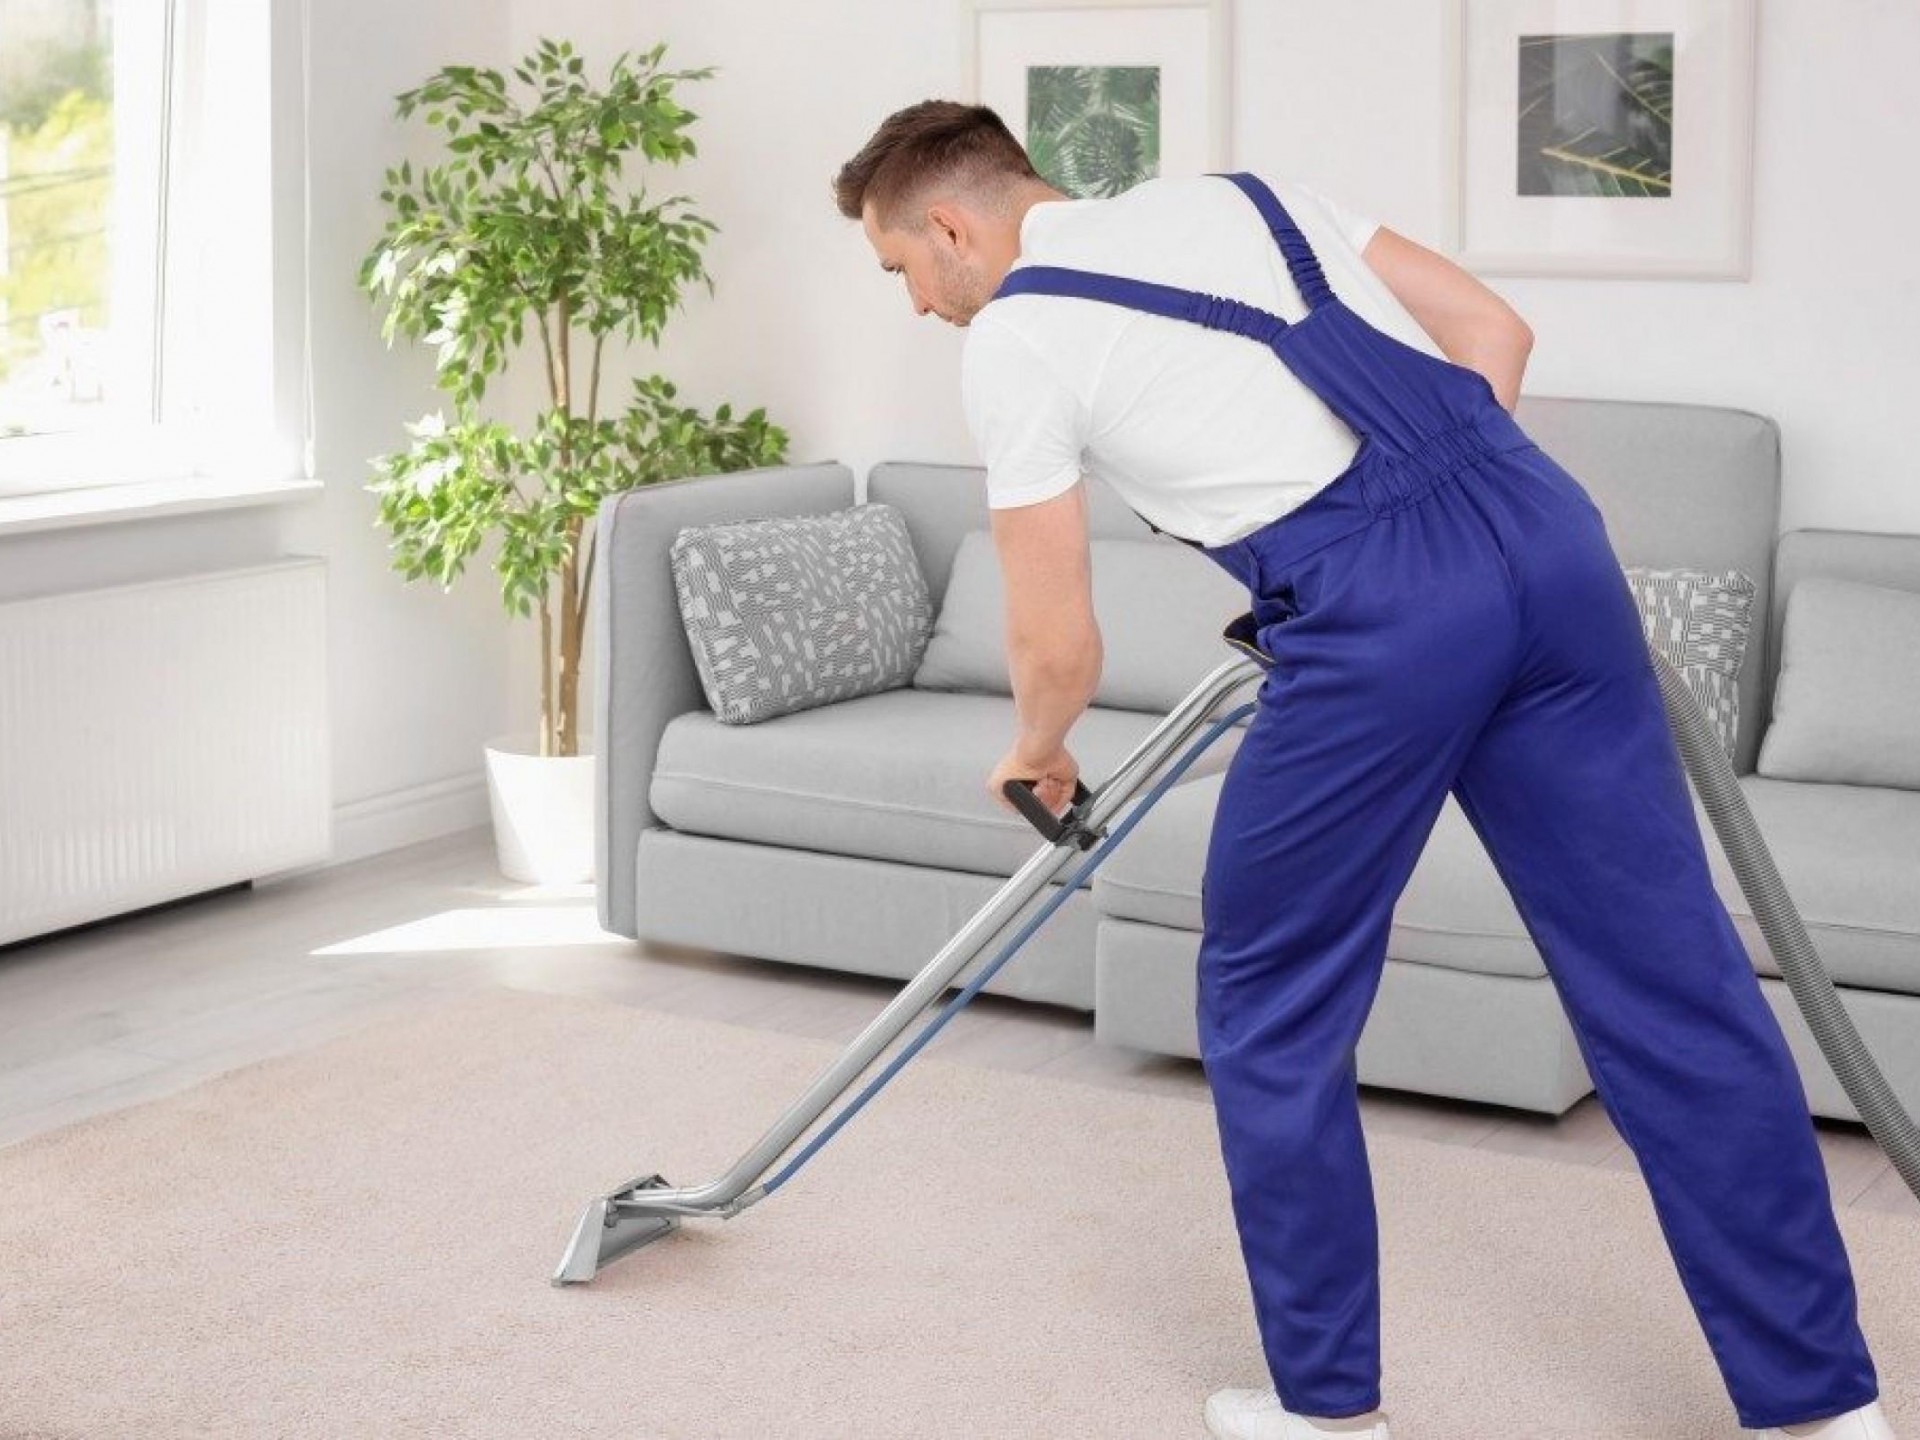 Carpet Cleaning business - 35 years EST. Huge data base.